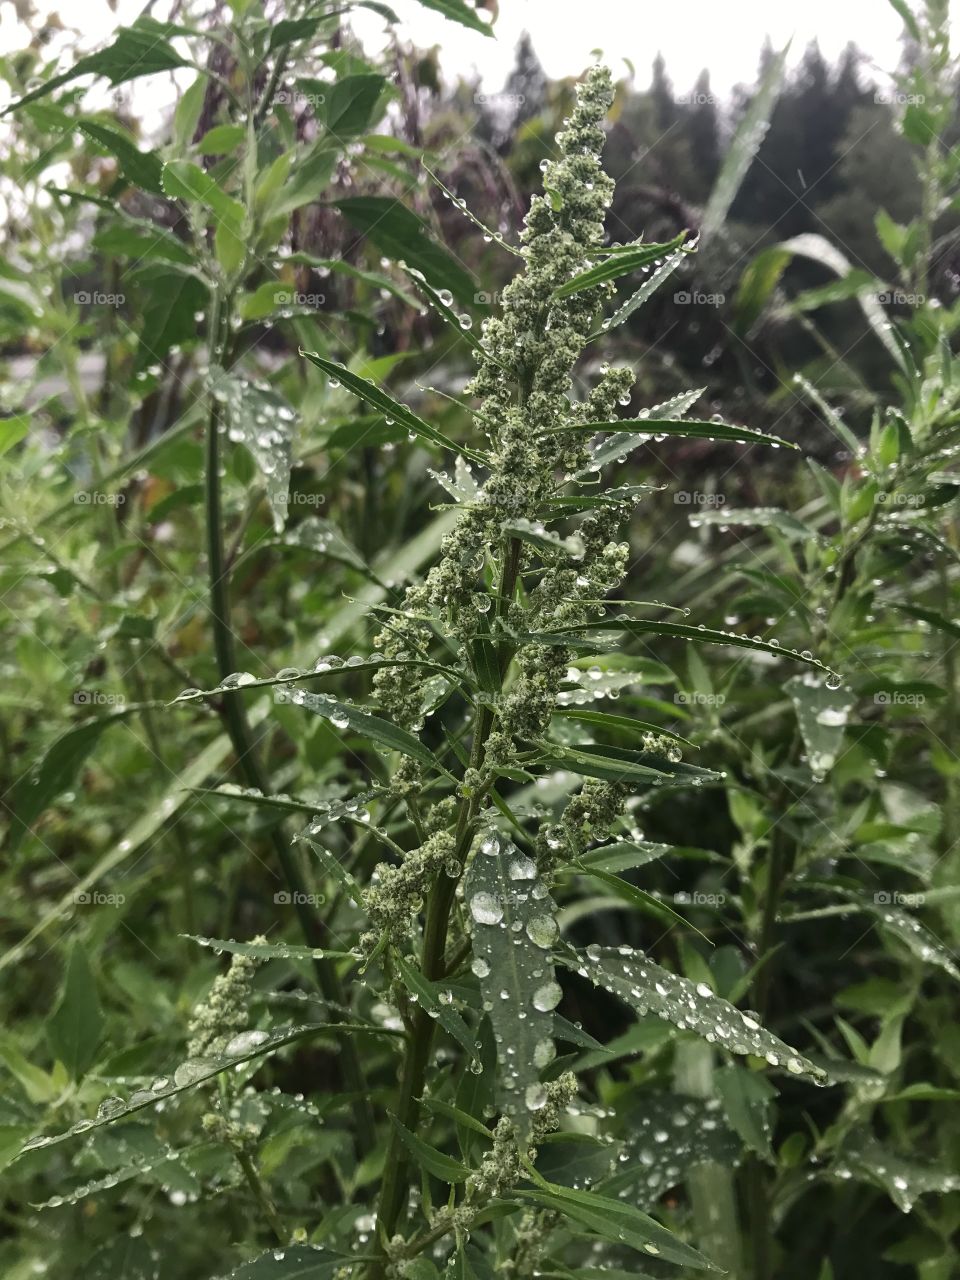 Plant after the rain